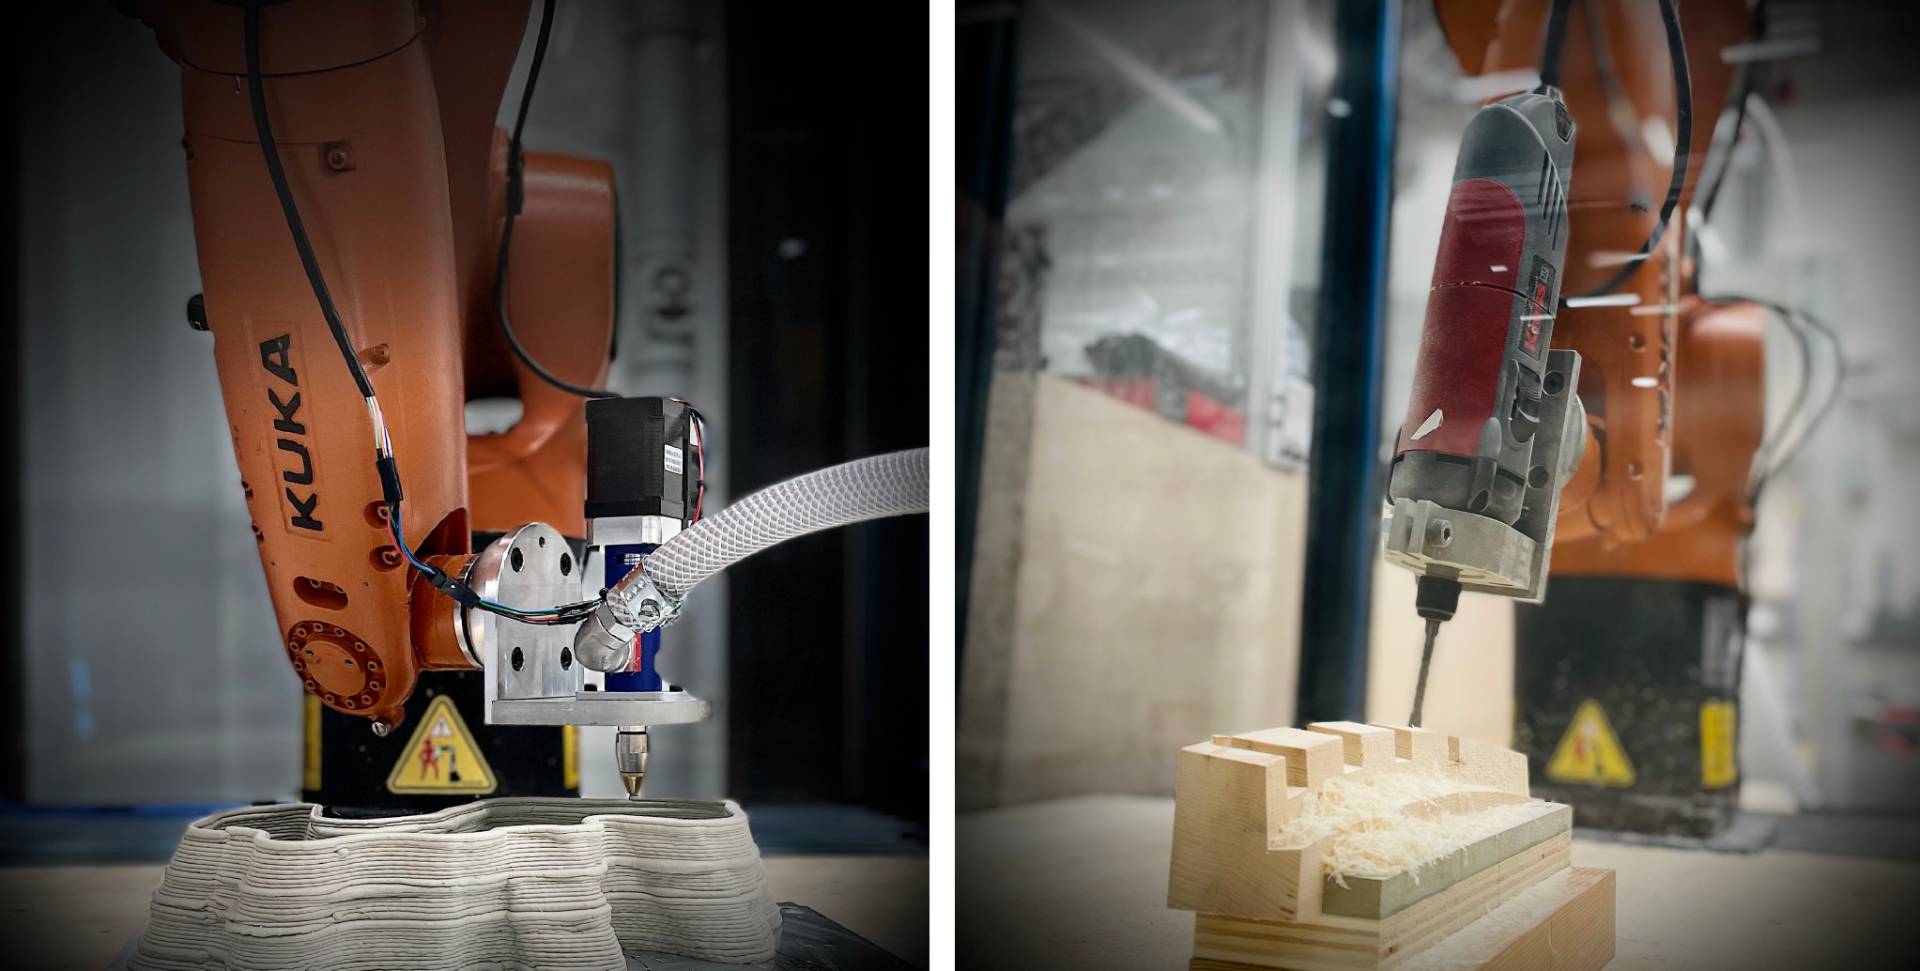 Robotic 3d Printing of Clay (Left) and Robotic Milling of Timber (Right) using Fusion 360